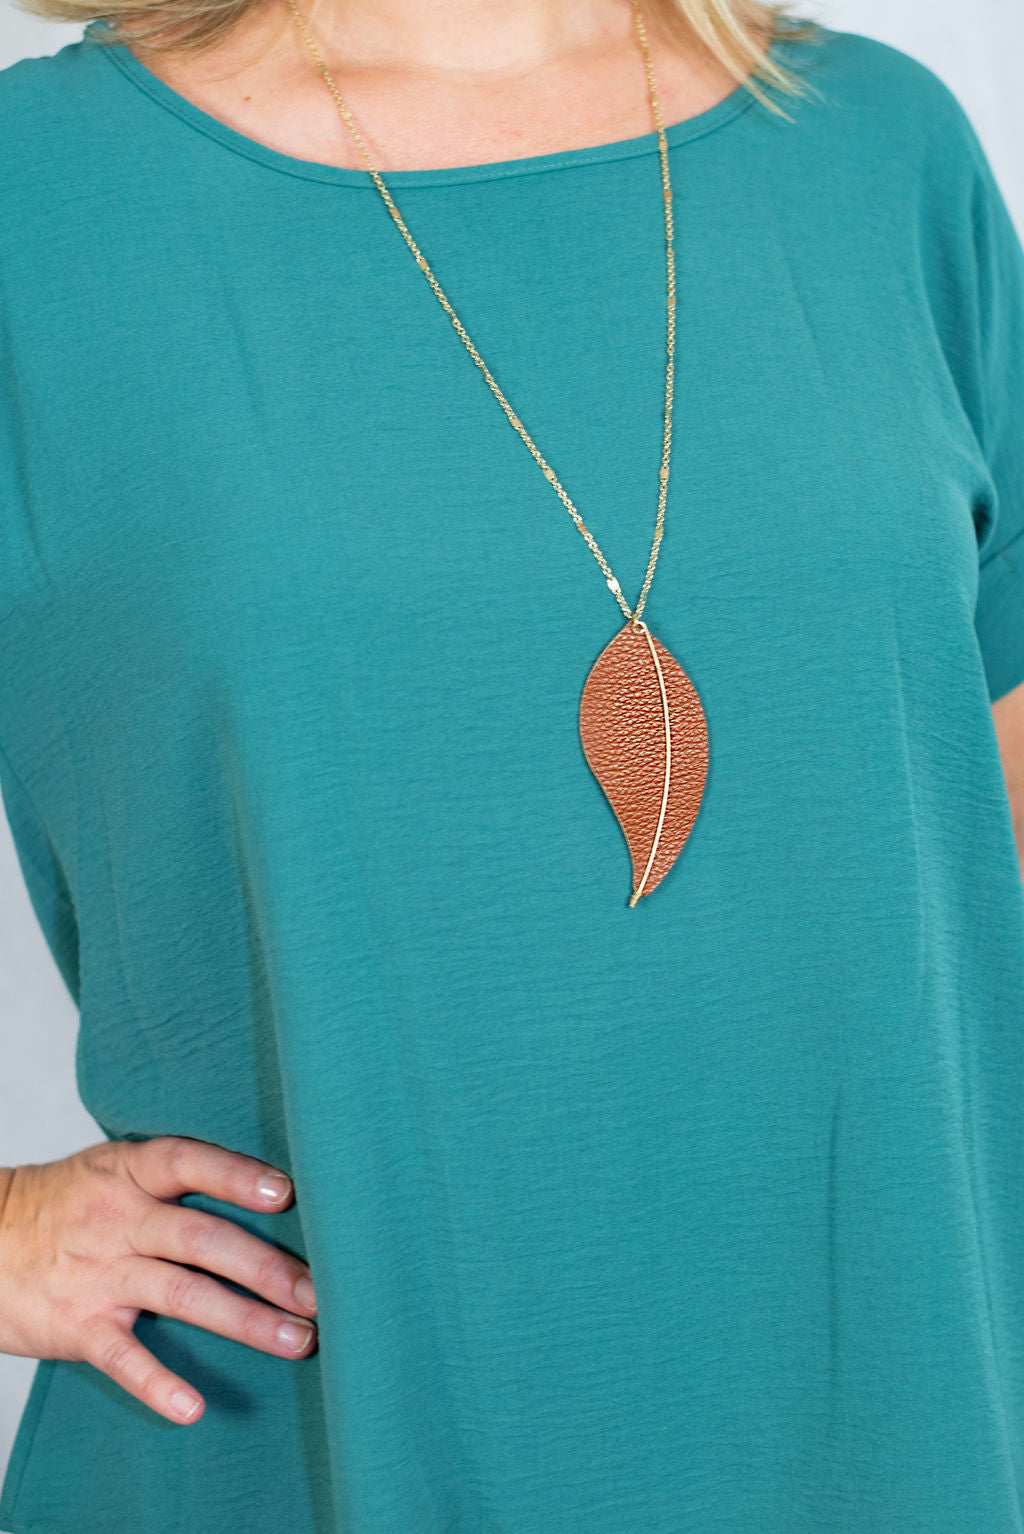 Crave Gold-tone and Caramel Faux Leather Leaf Pendant Necklace